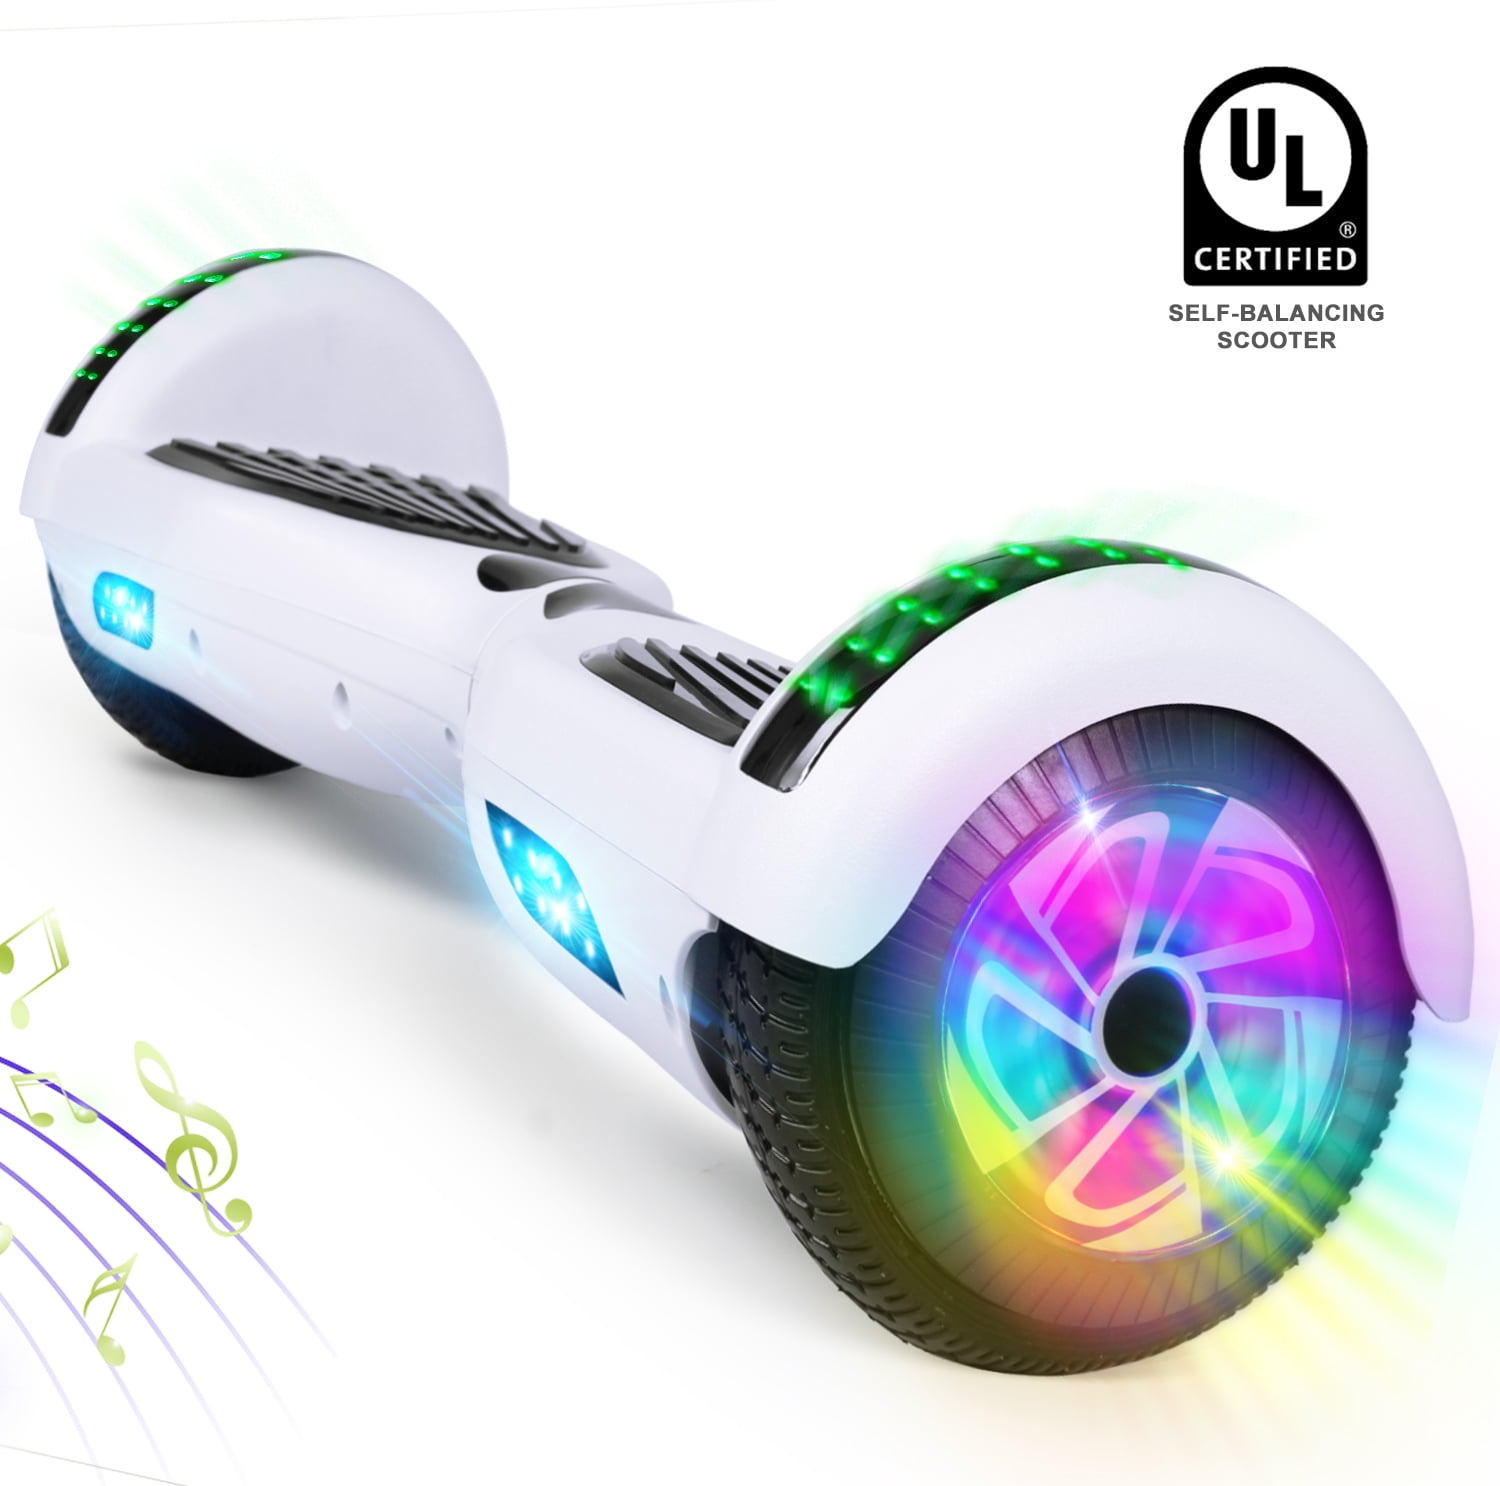 Hoverboard 6.5" Two-Wheels Balancing Scooter w/ Bluetooth Speaker No Bag Green 